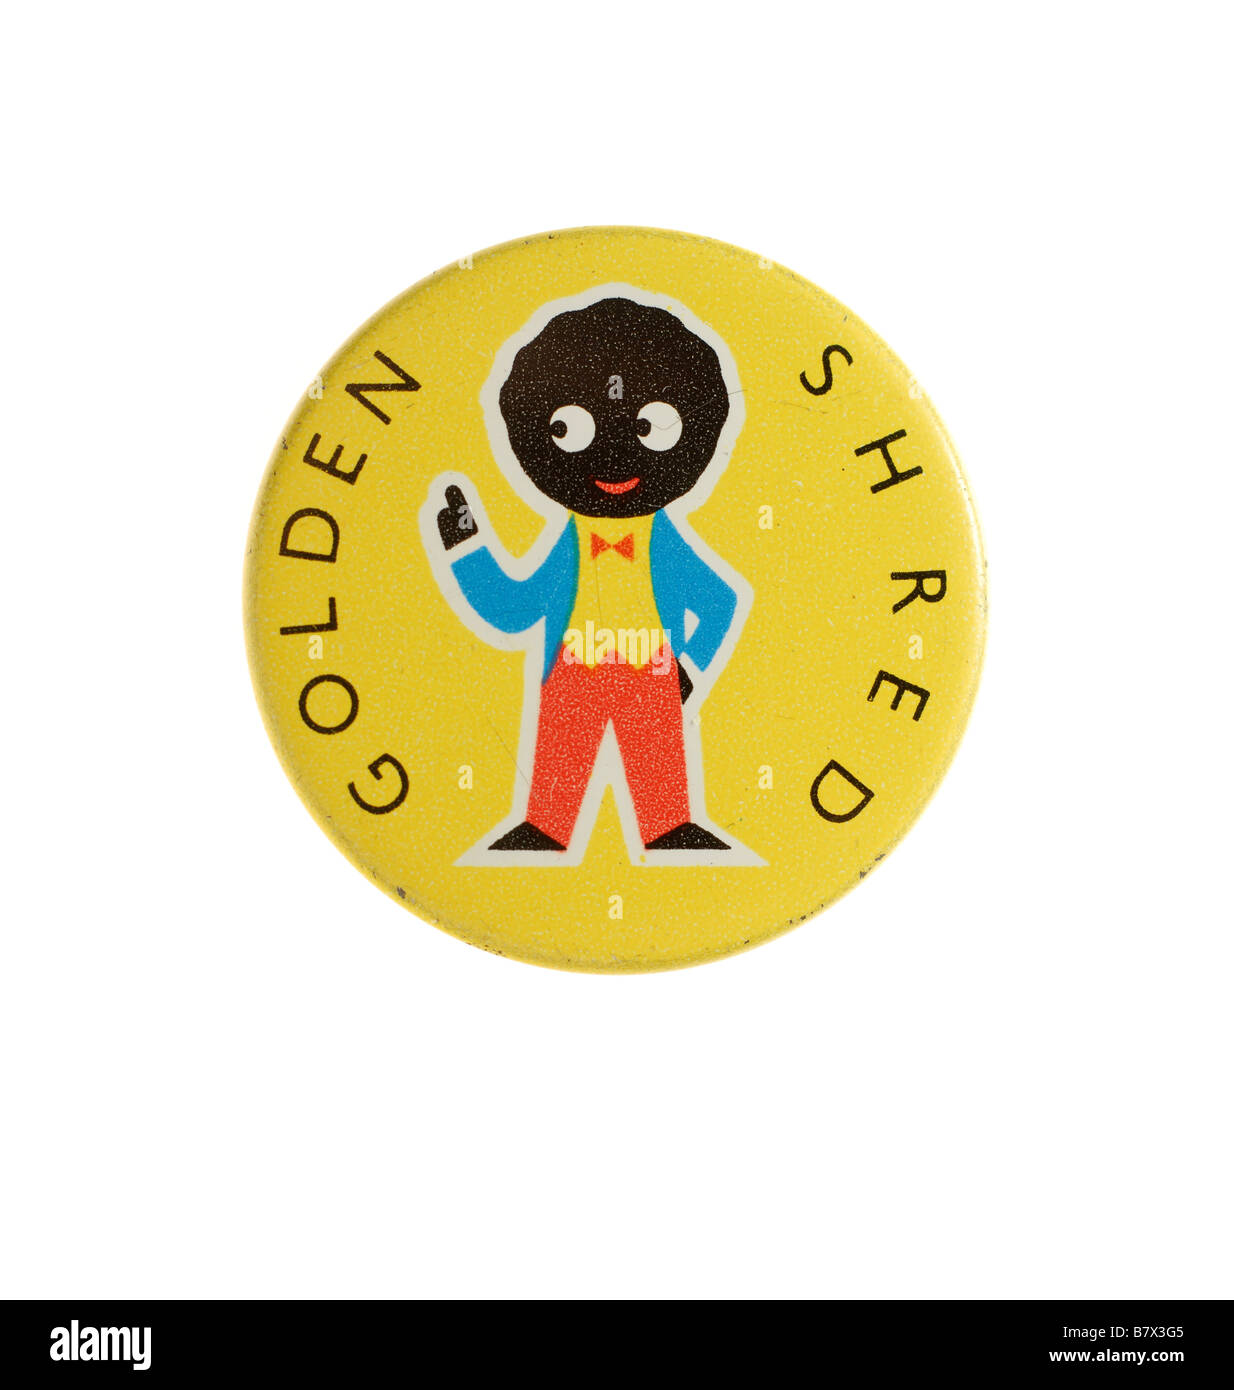 Golden Shred 'Golly' character badge from 1970's Stock Photo